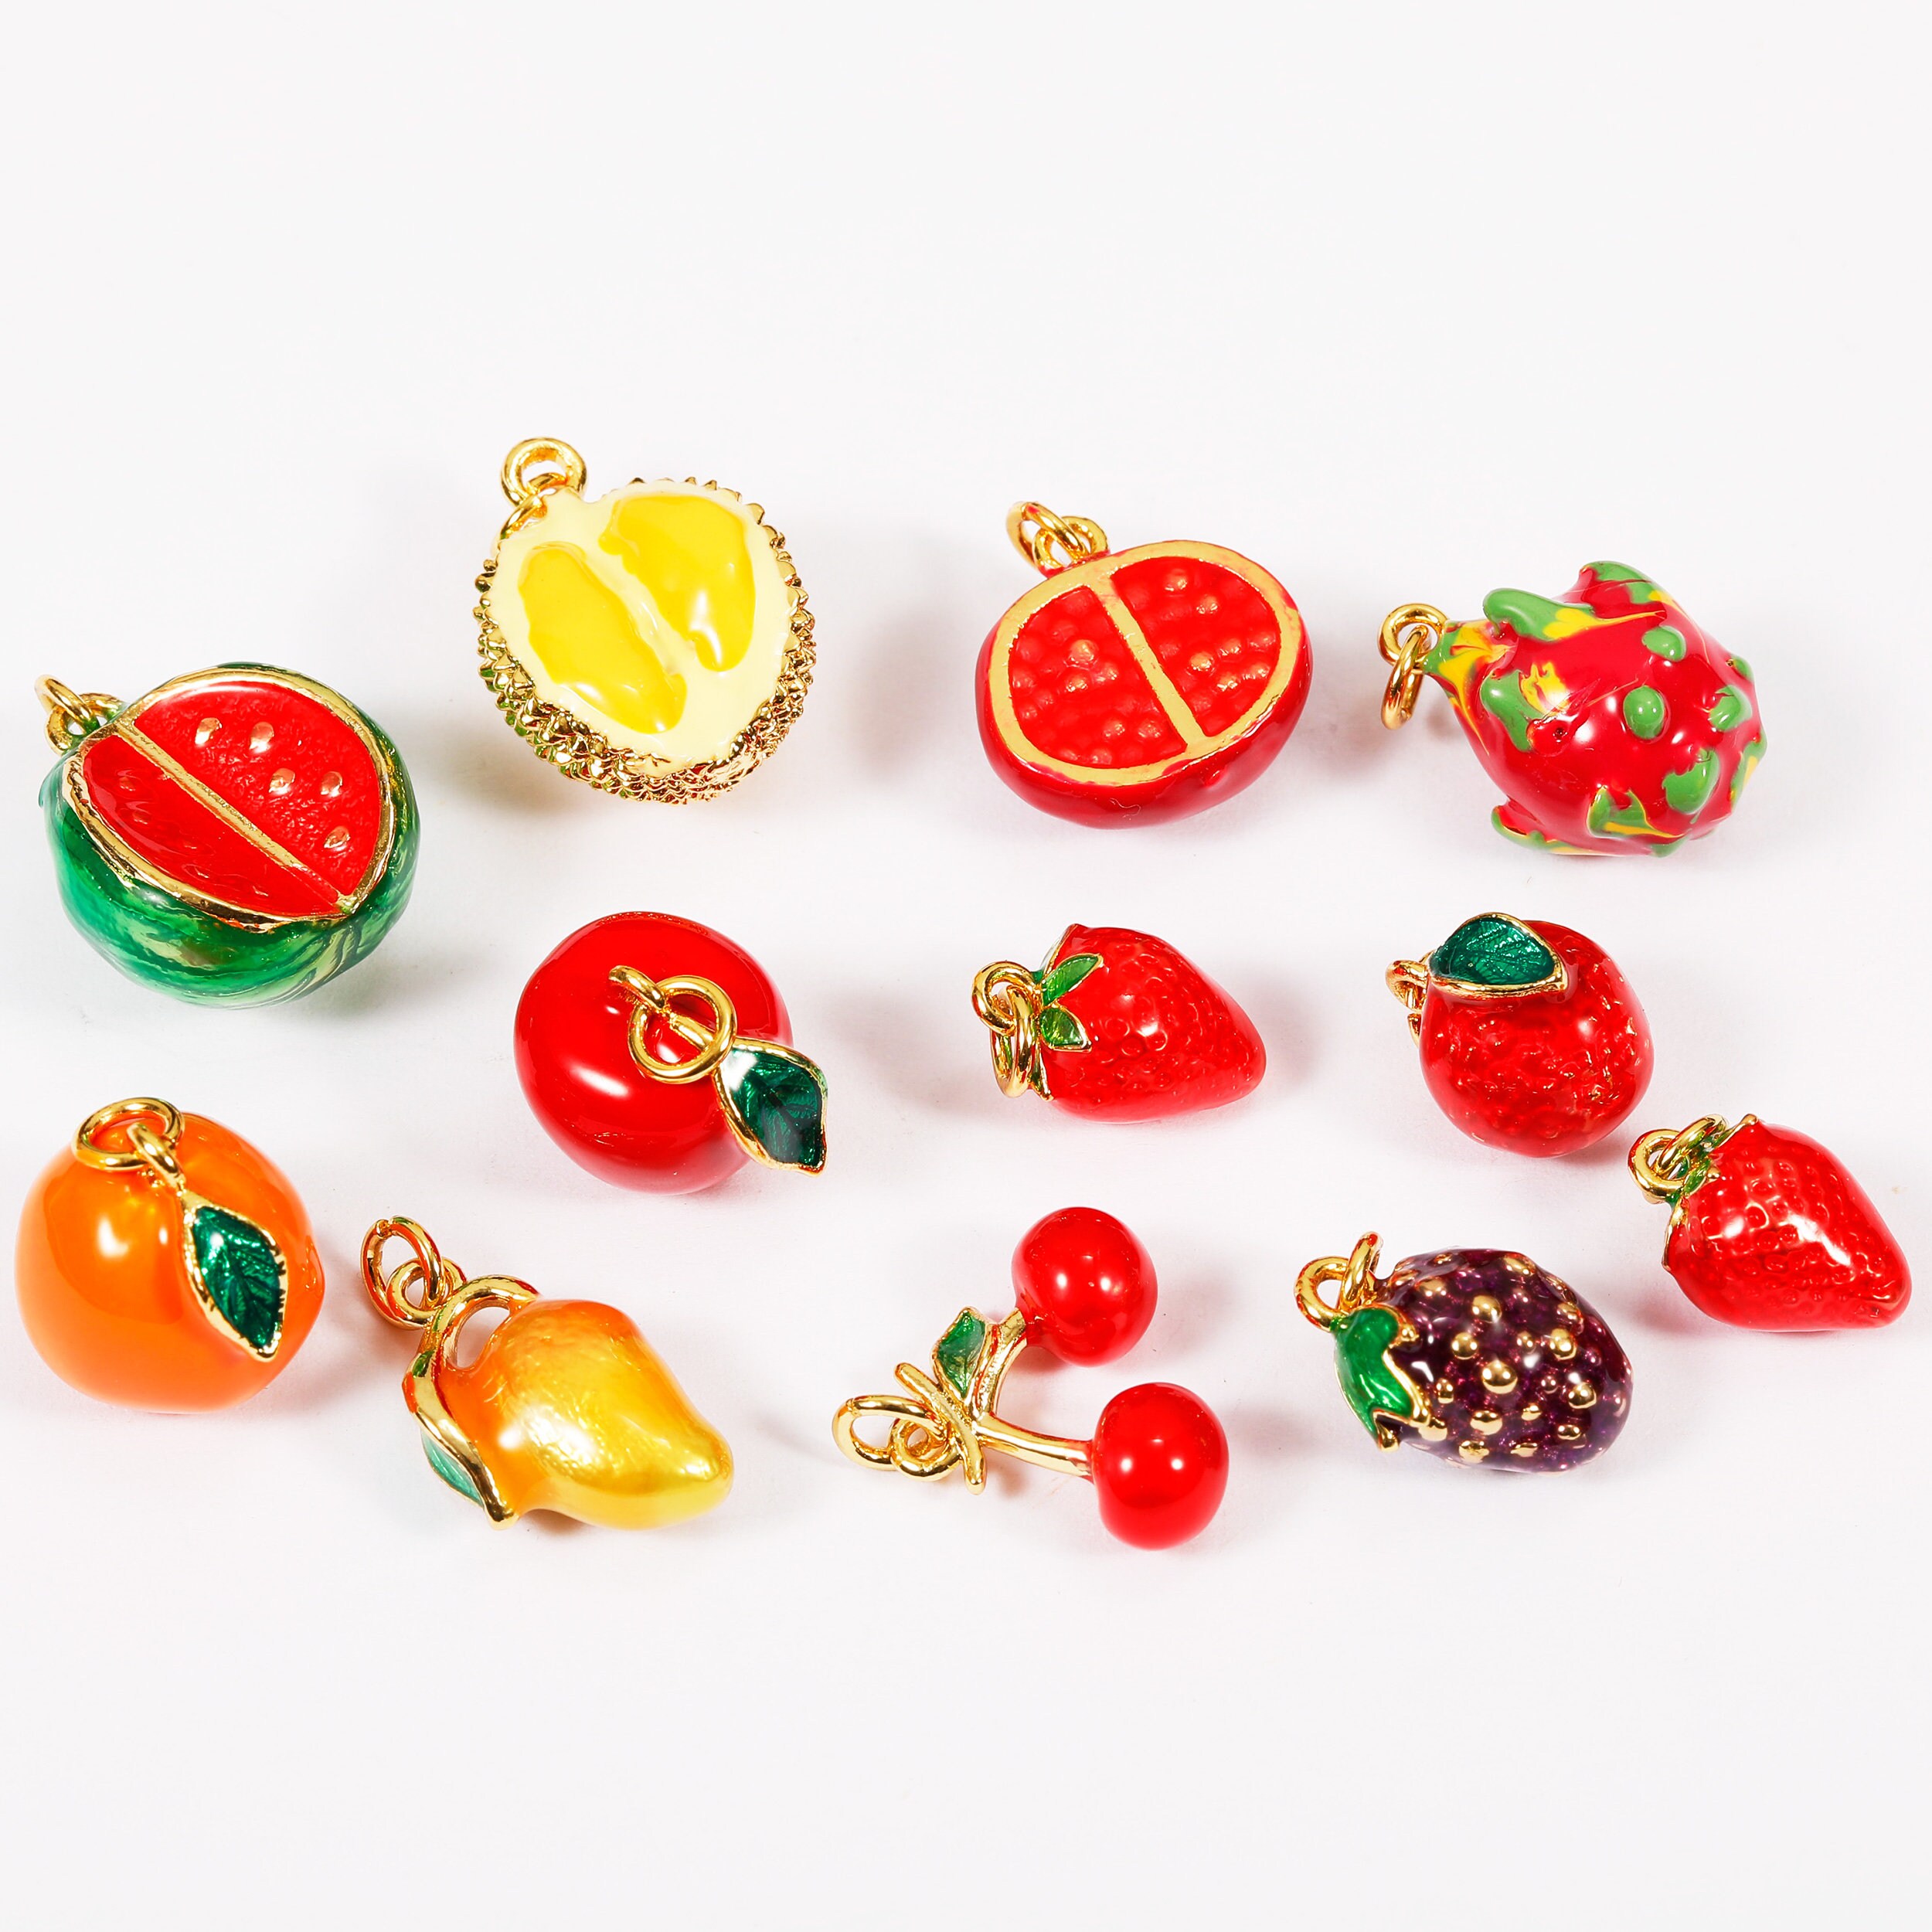 Set of 10 Mixed Fruit Charms